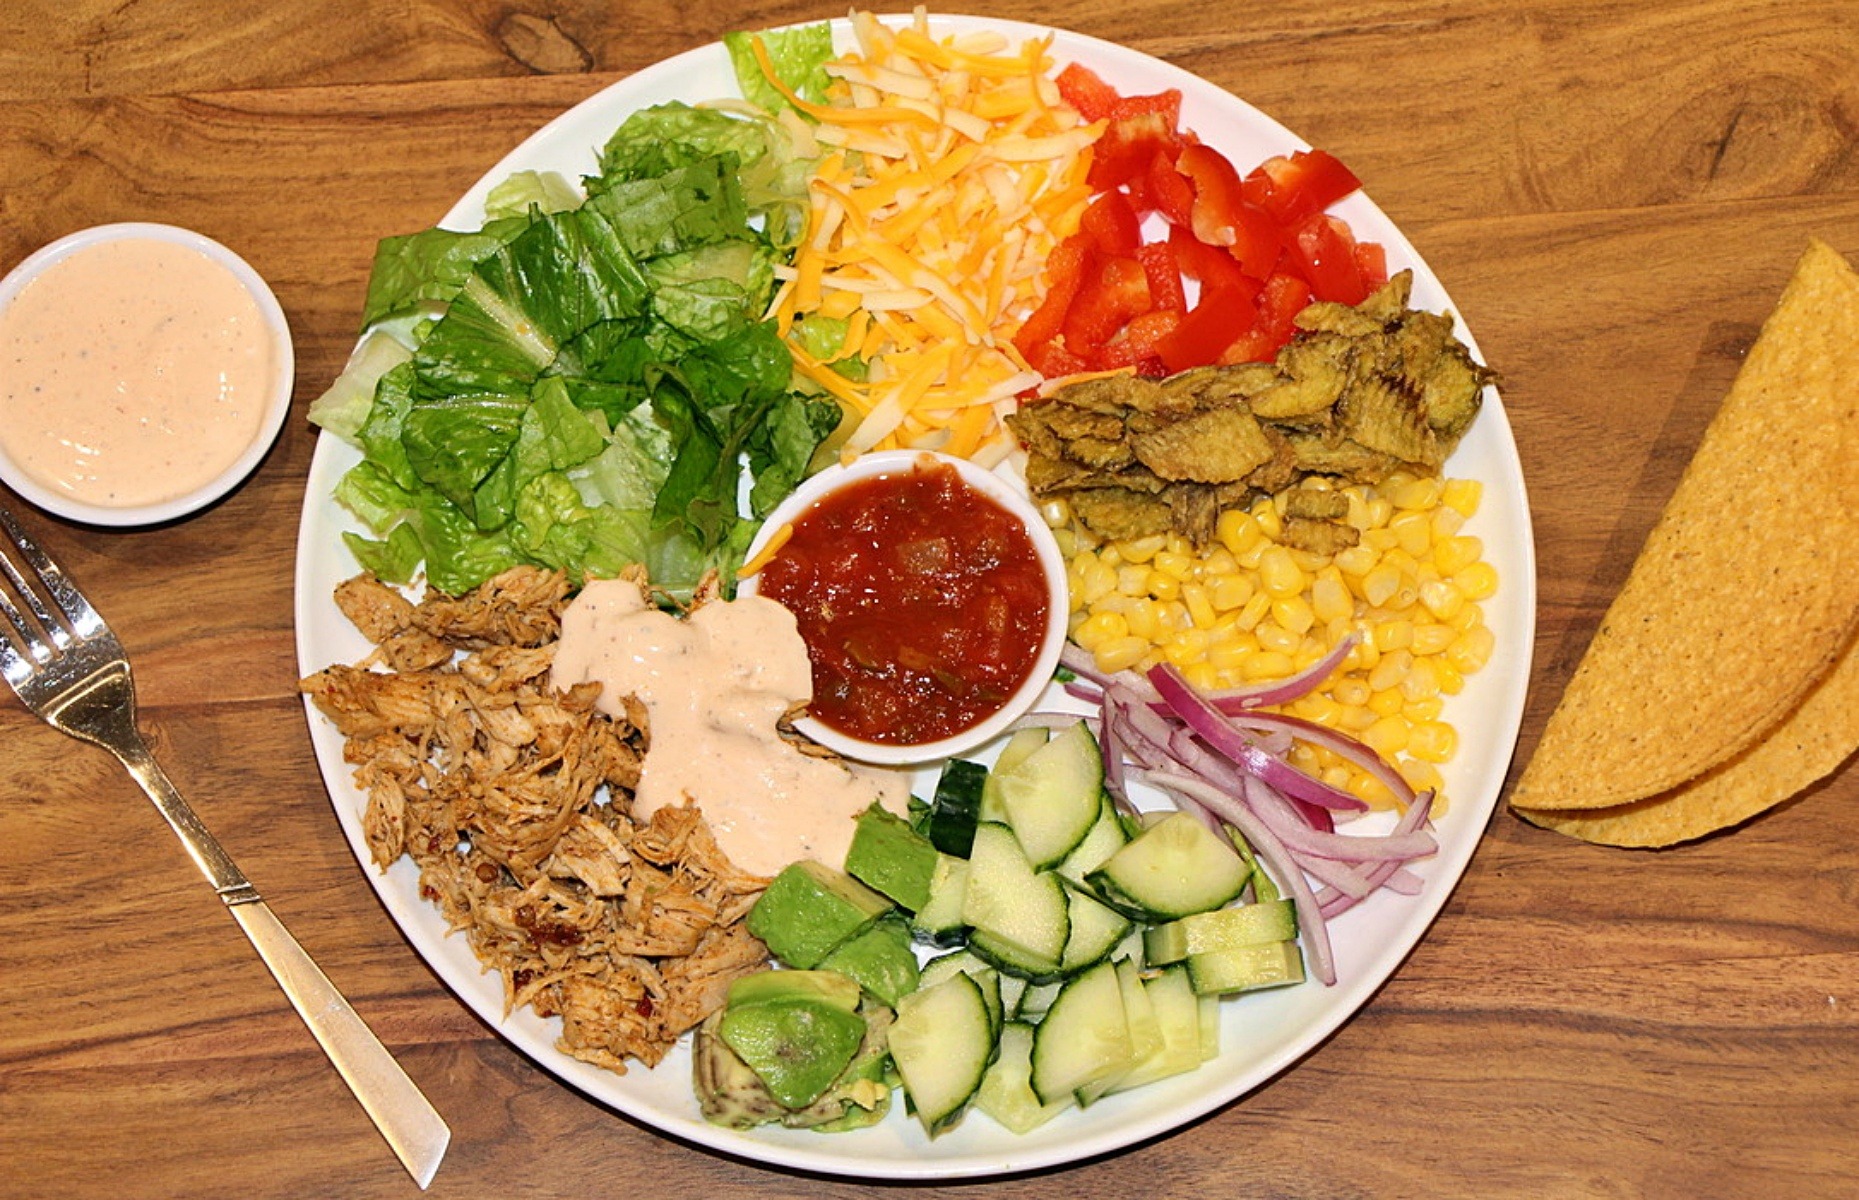 Taco salad with pulled chicken